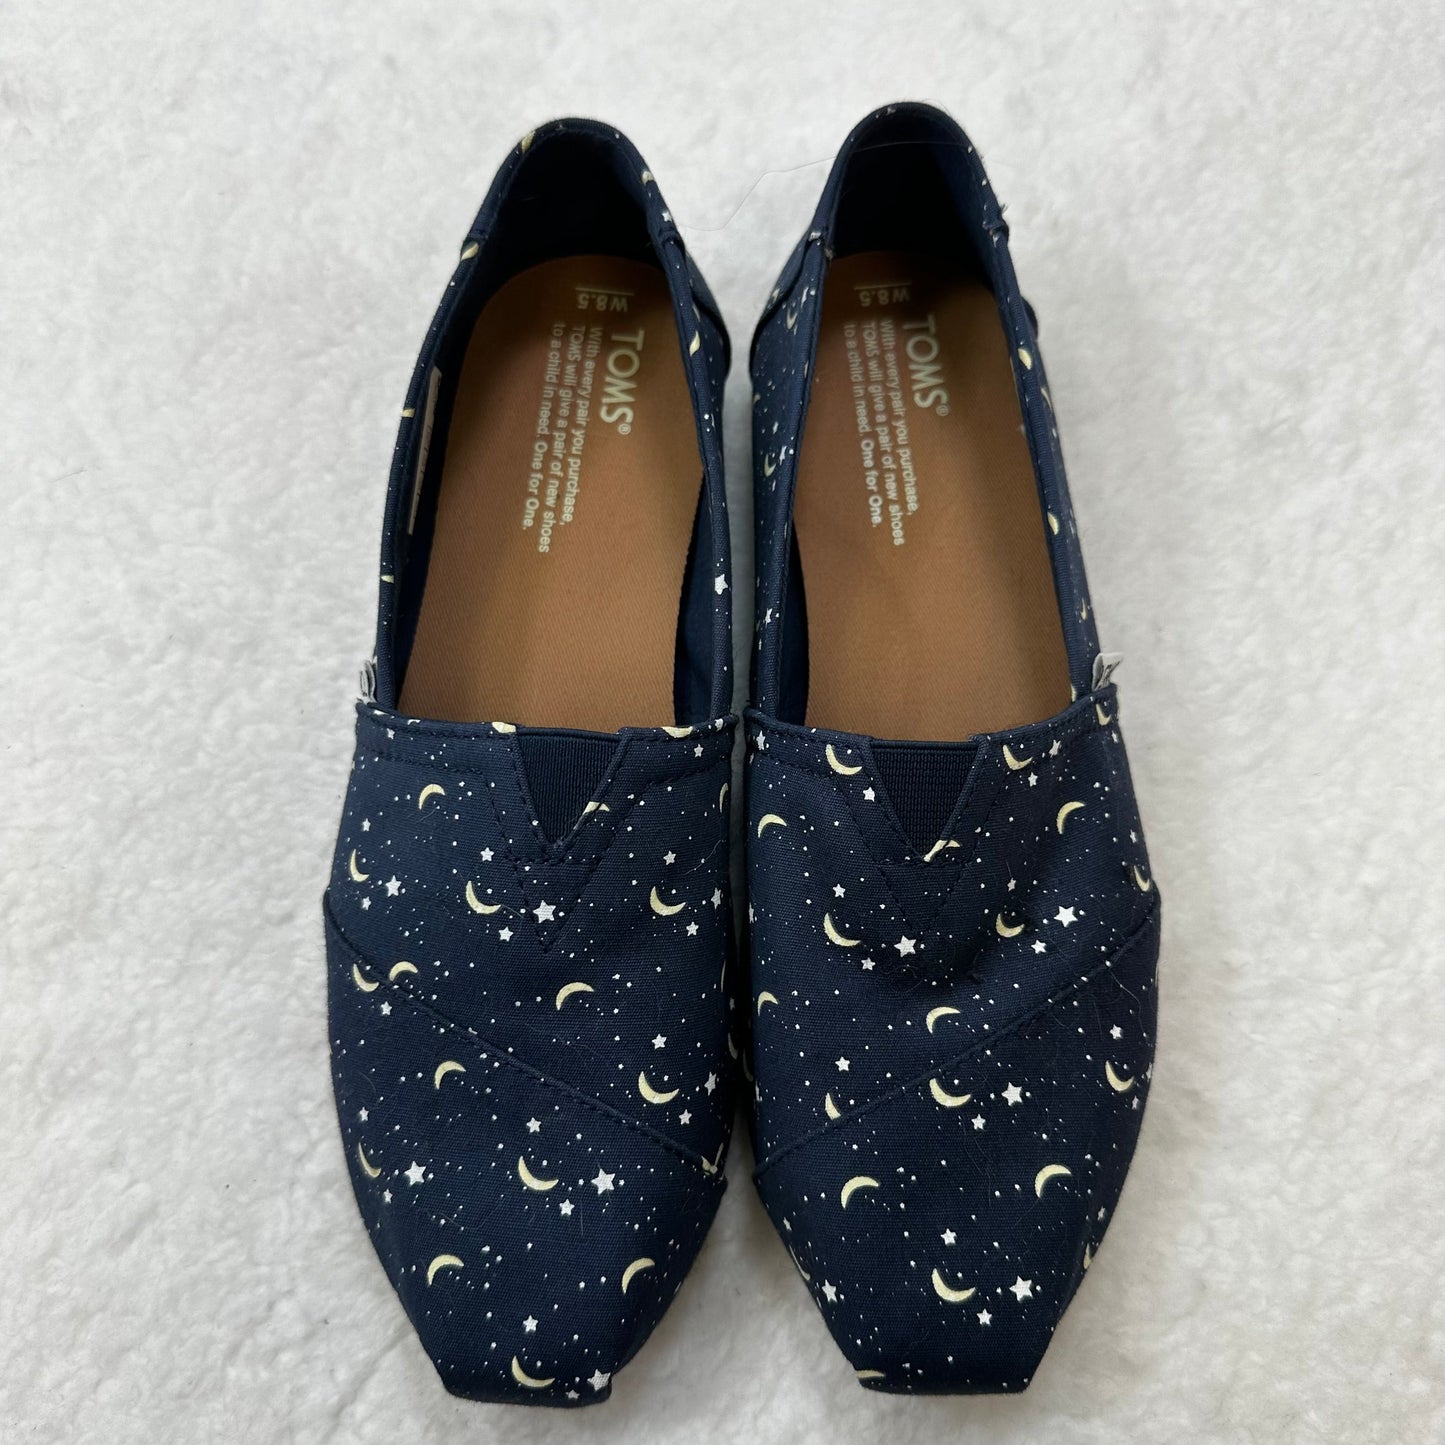 Print Shoes Flats Loafer Oxford Toms, Size 8.5